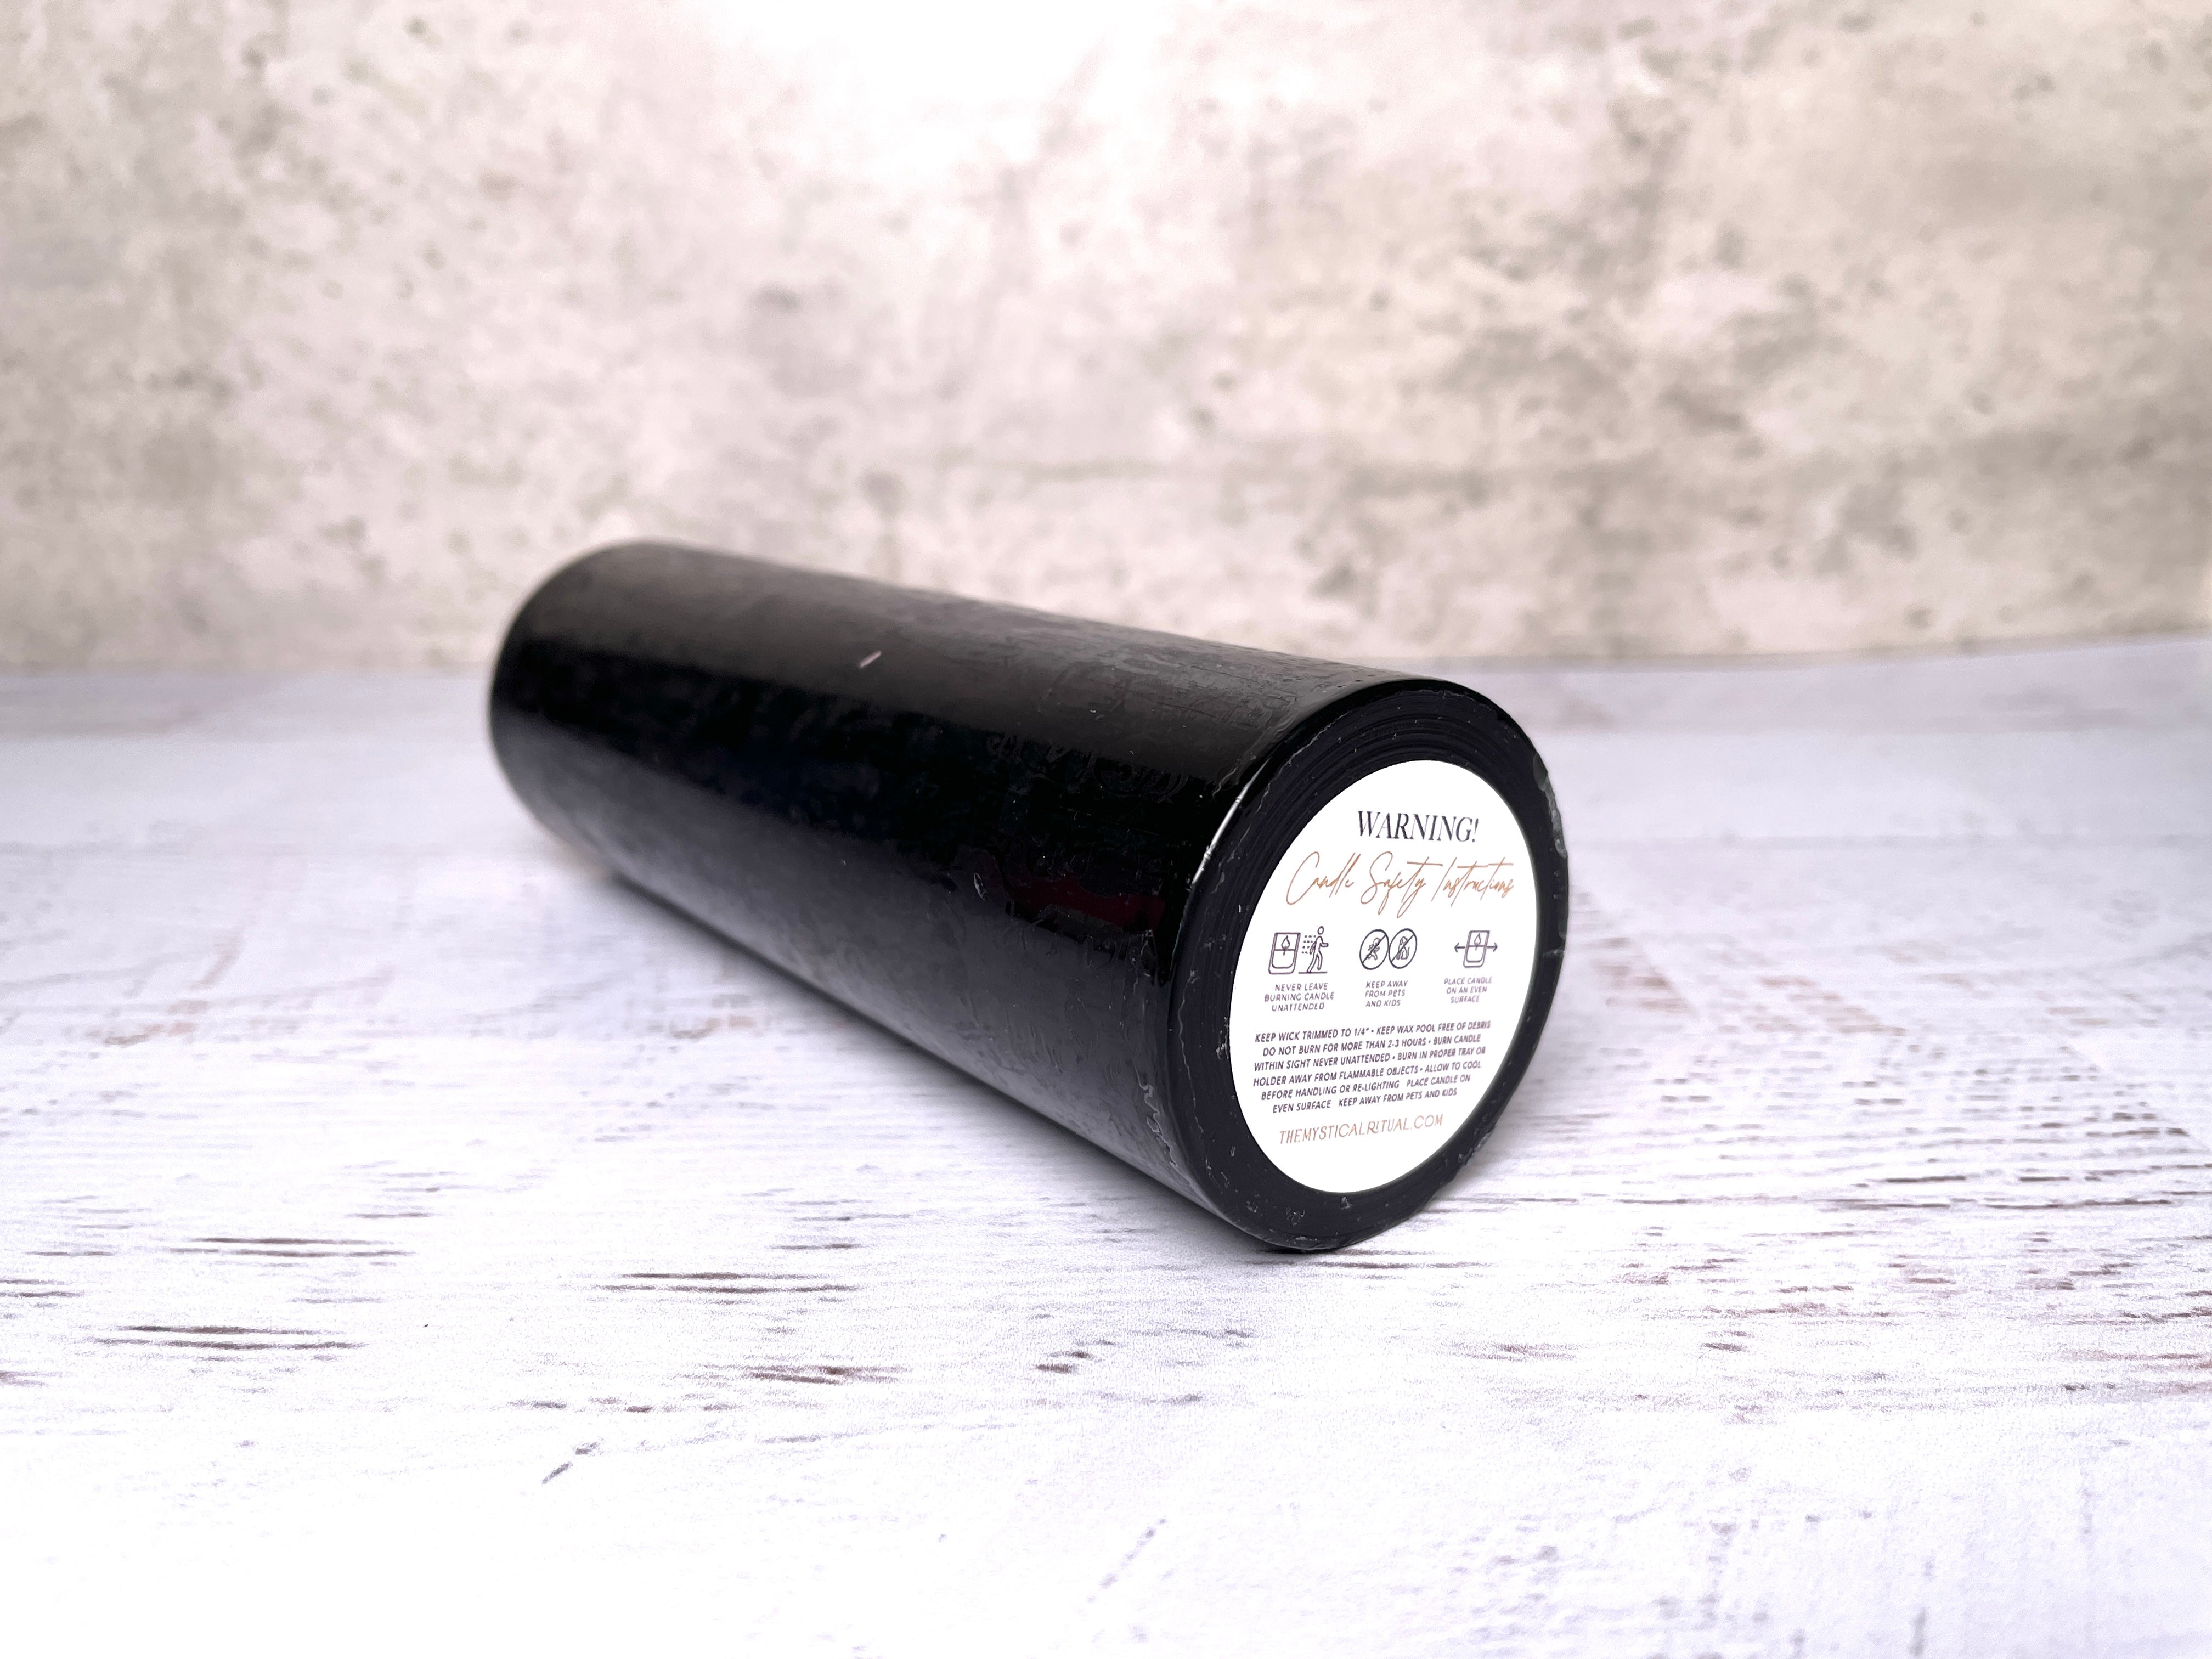 Buy Online Latest and Unique Black Pillar Candle 2"x 6" - Protection, Repelling, Protection, Banishing | Shop Best Spiritual Items - The Mystical Ritual